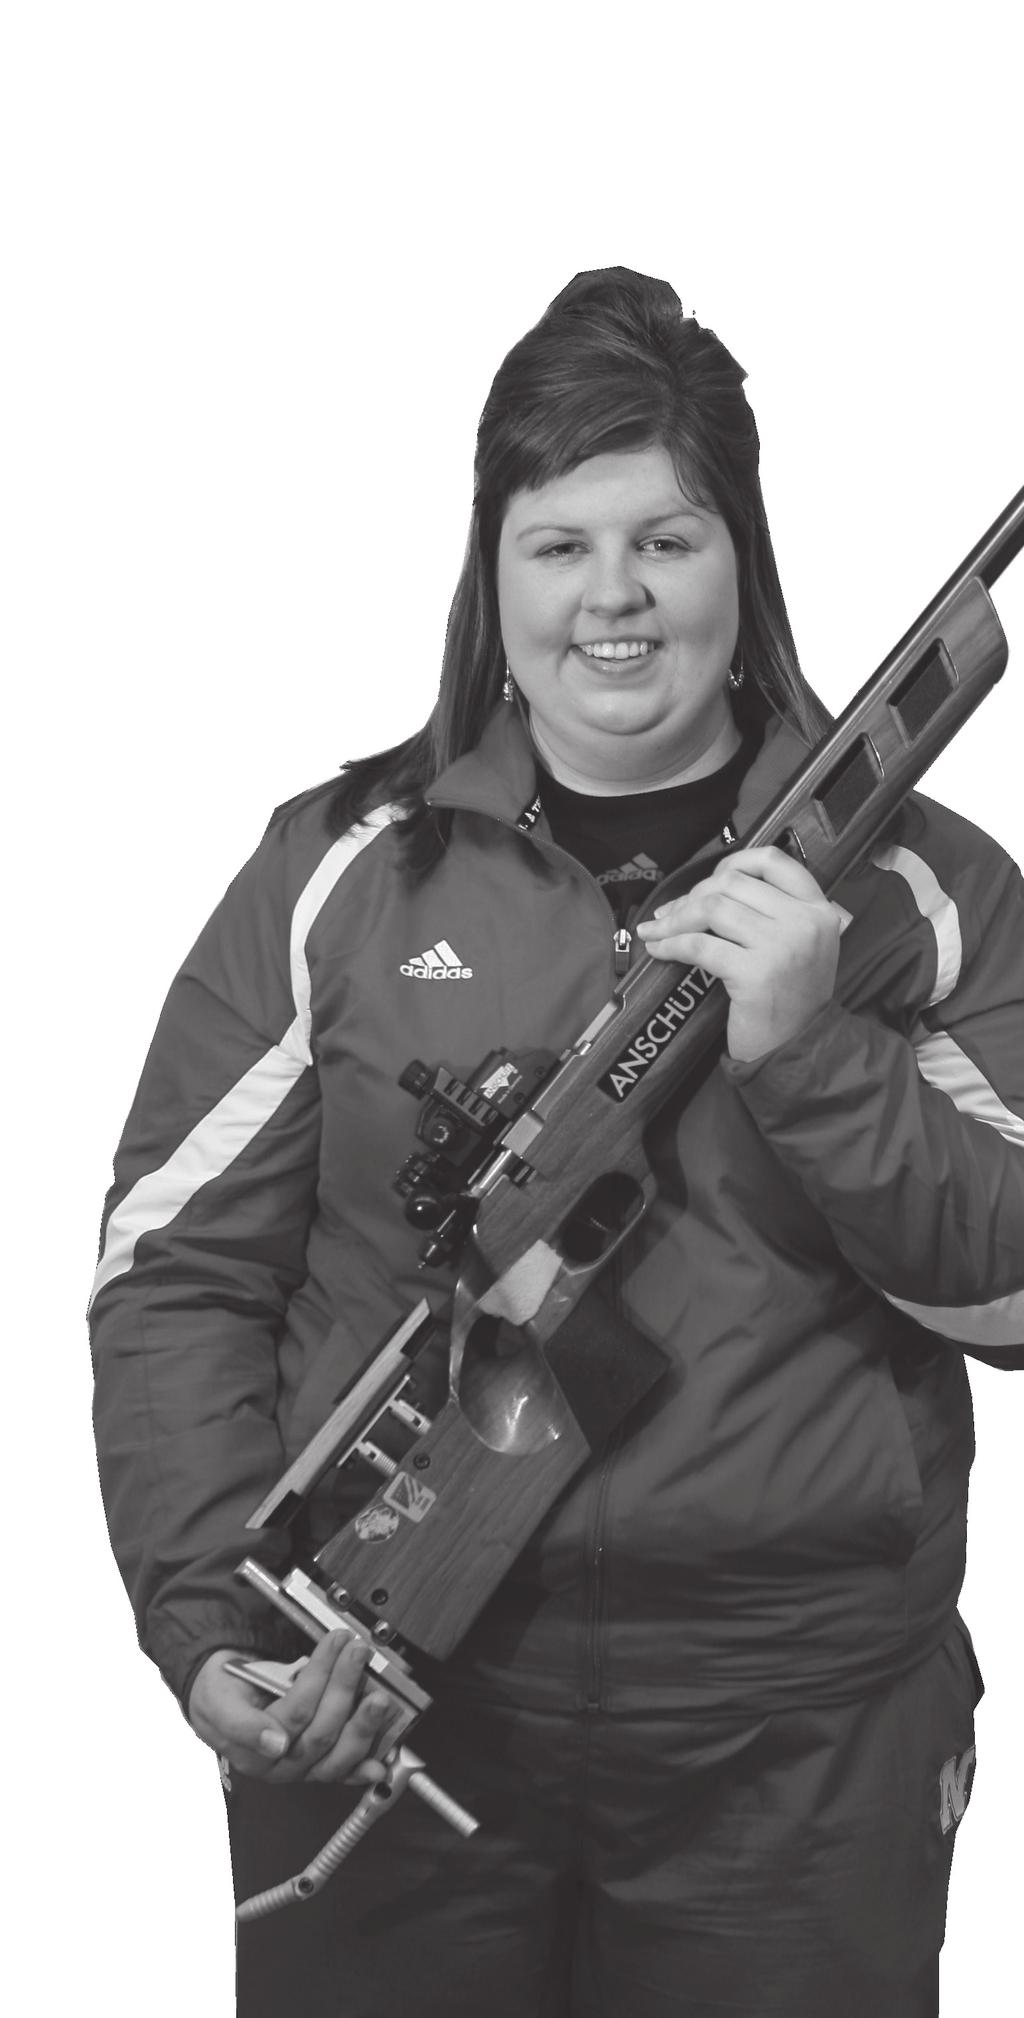 She seems to feel more comfortable with air rifle, Hicks said. She s going to work with her strengths. Sophomore Season (2008-09) Smallbore Avg: 55.1 Avg: 570.1 Smallbore Best: 573 (vs.